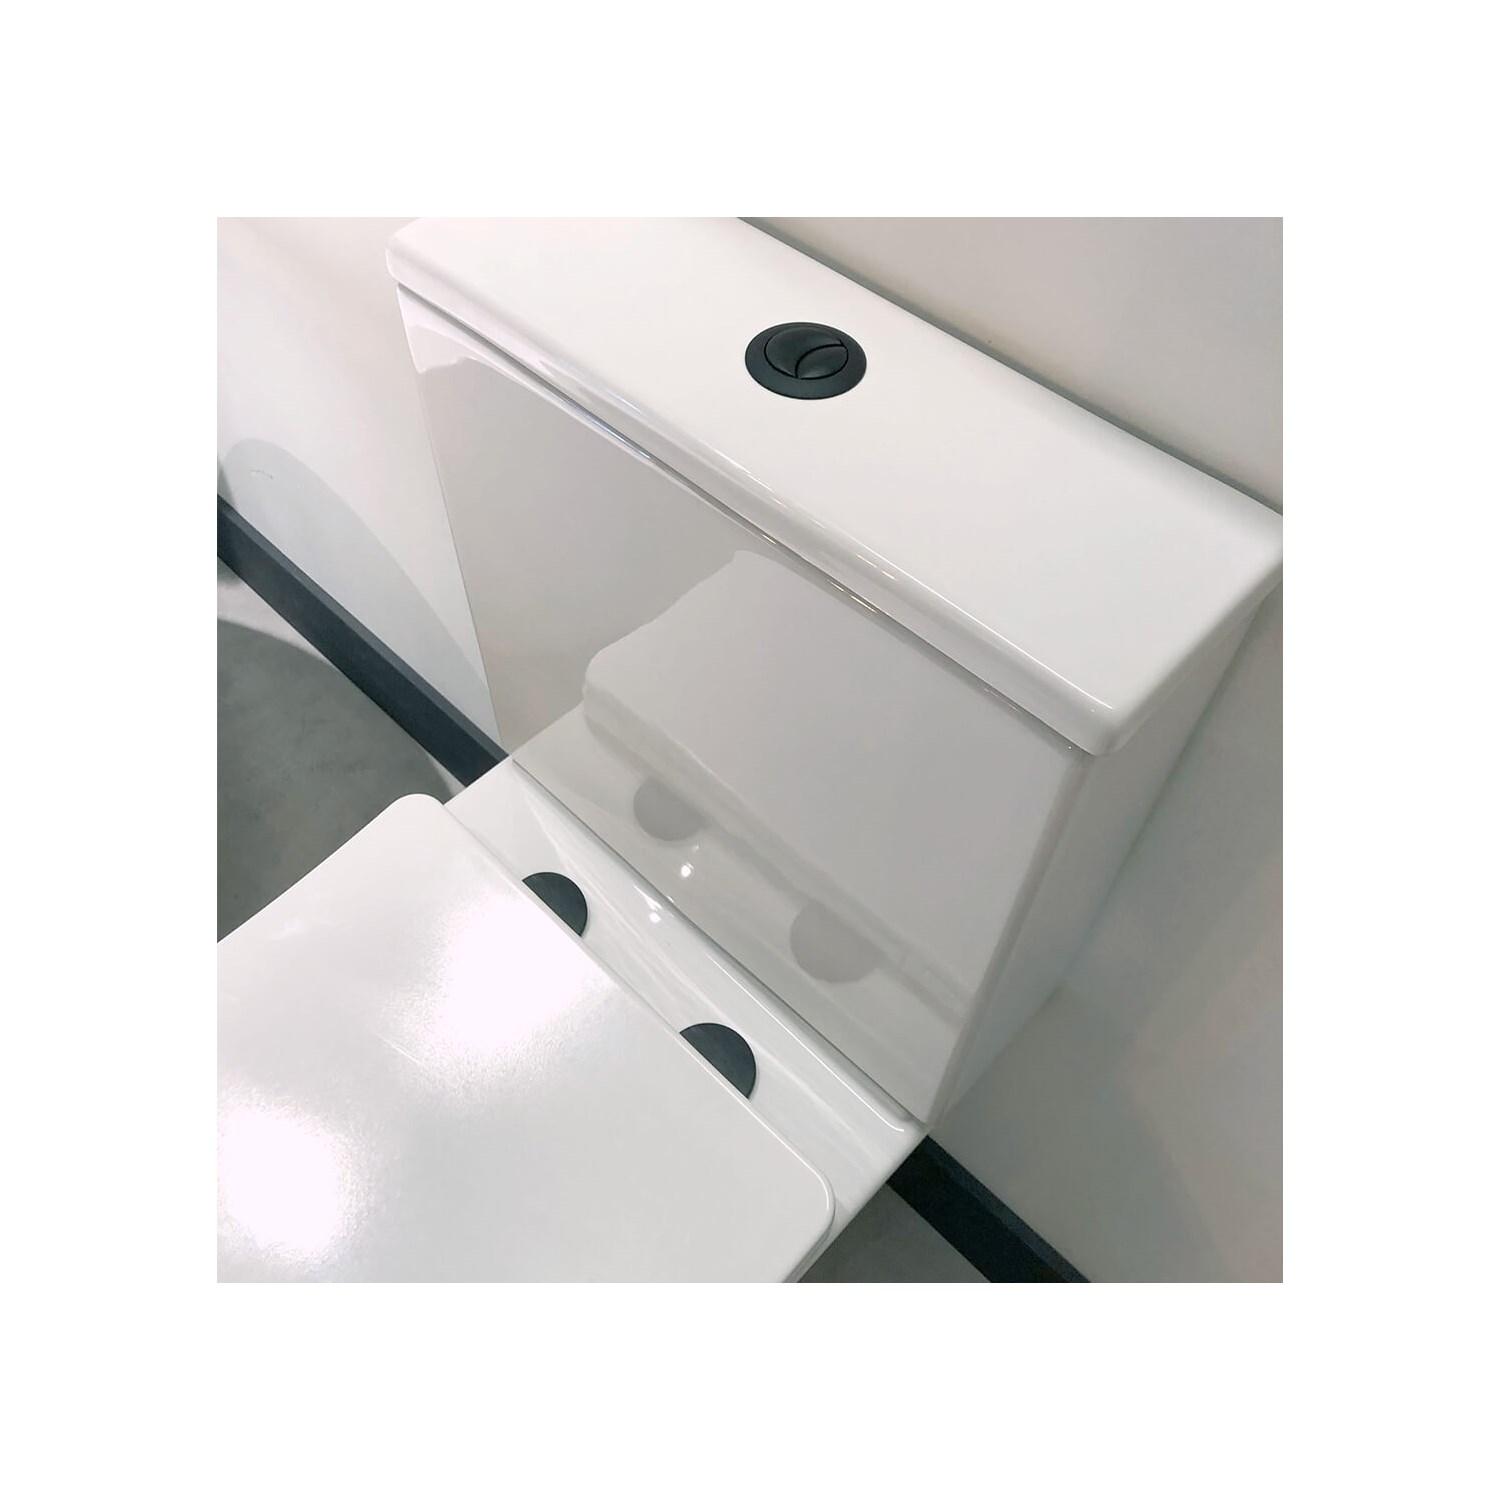 Harbour Serenity Black Dual Flush Button & Toilet Seat Hinge Cover Pack